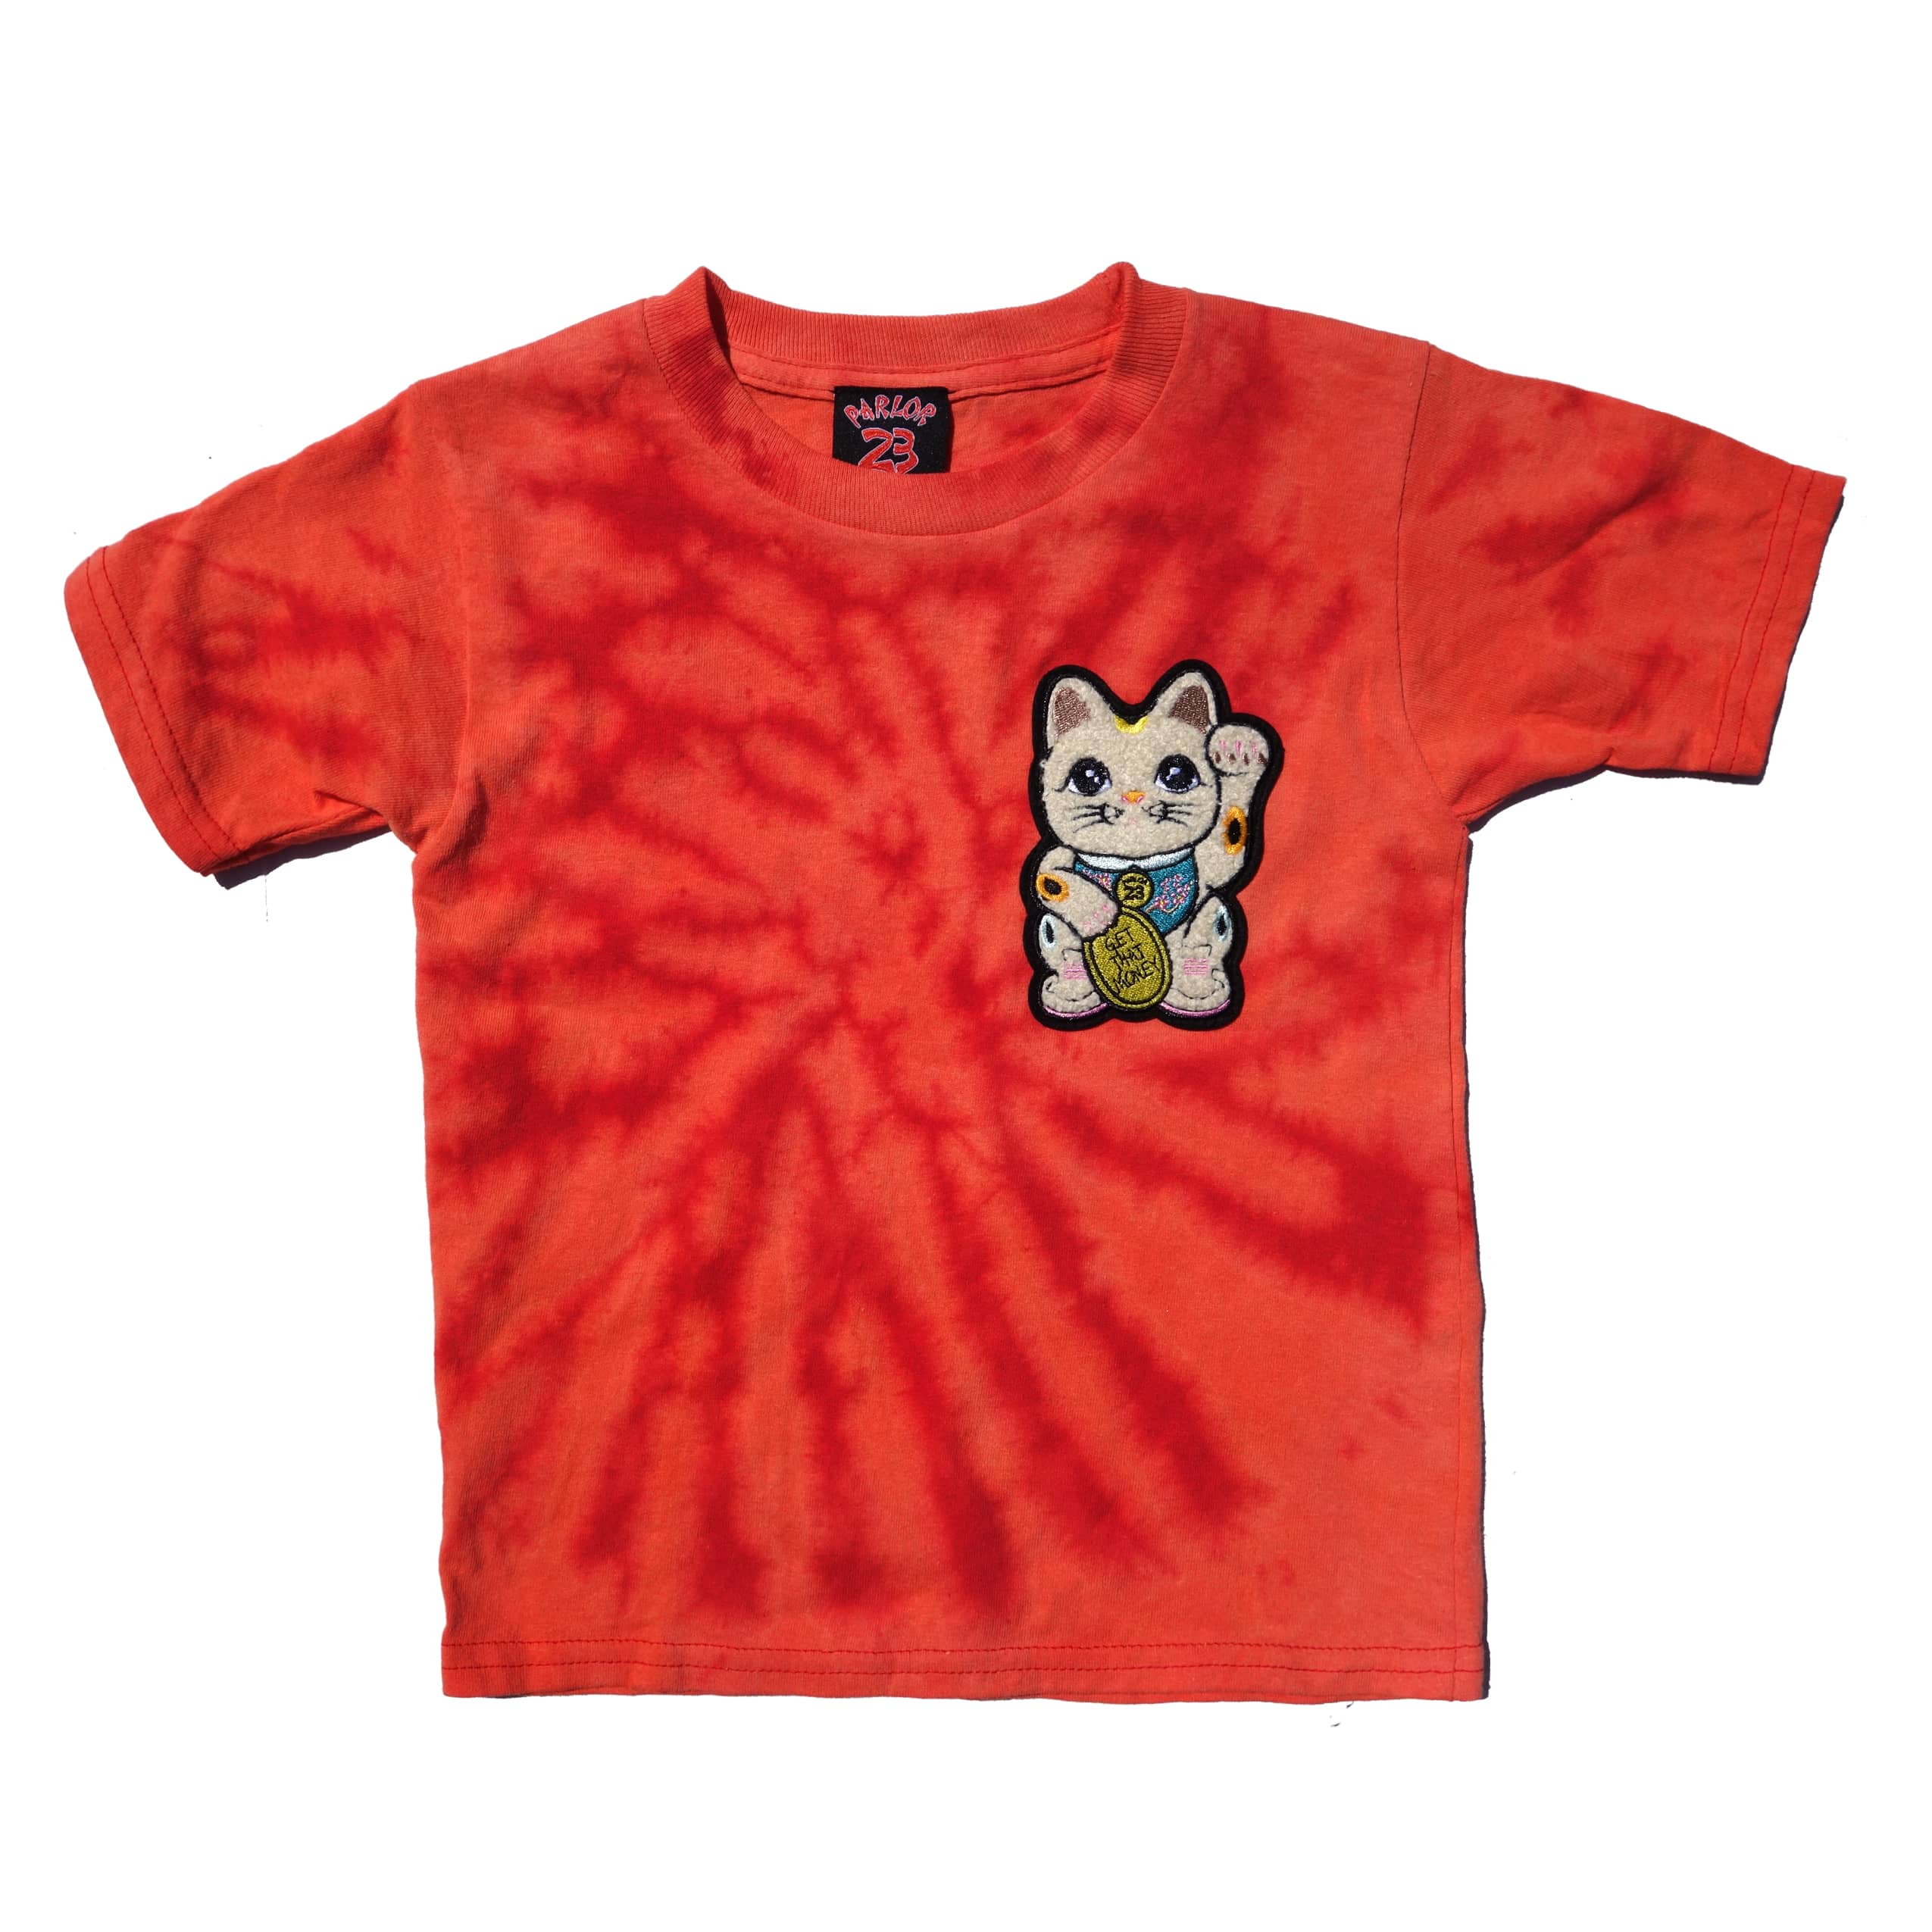 Parlor 23 Dyed Chenille Toddler "Get that Money" T-Shirt